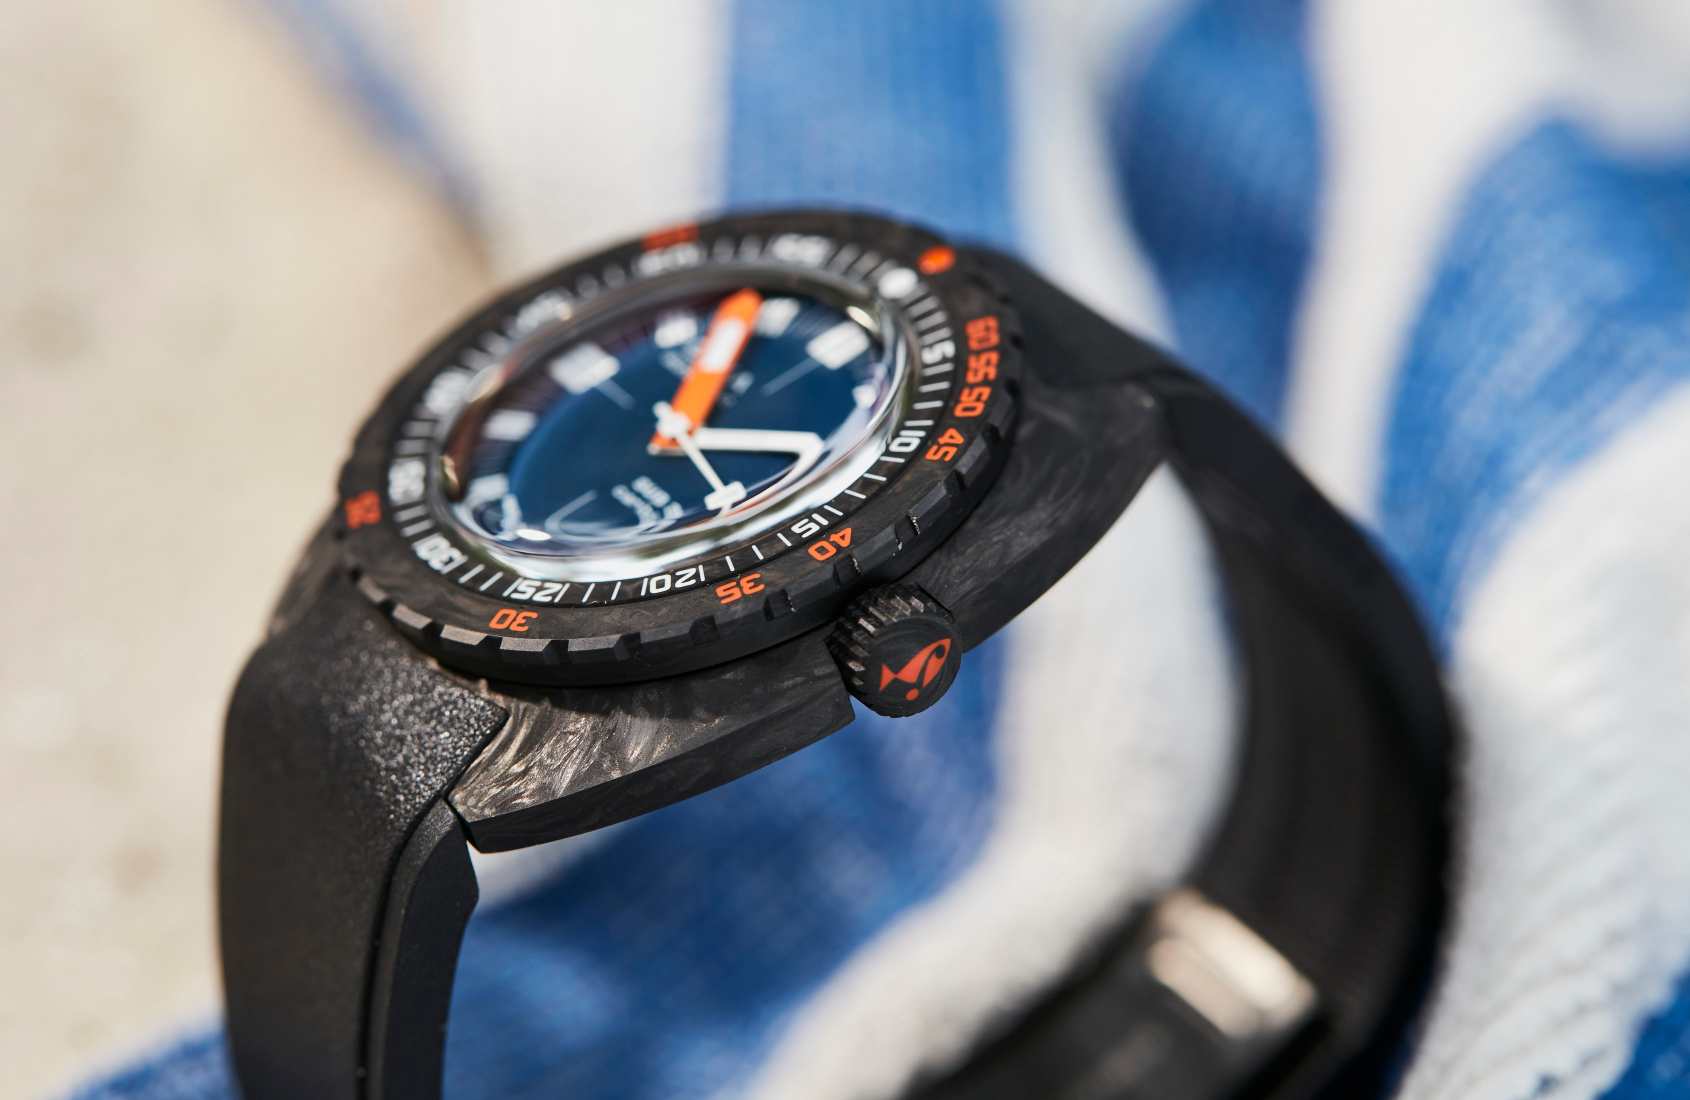 DOXA Sub 300 Carbon range delivers 6 eye-popping dials